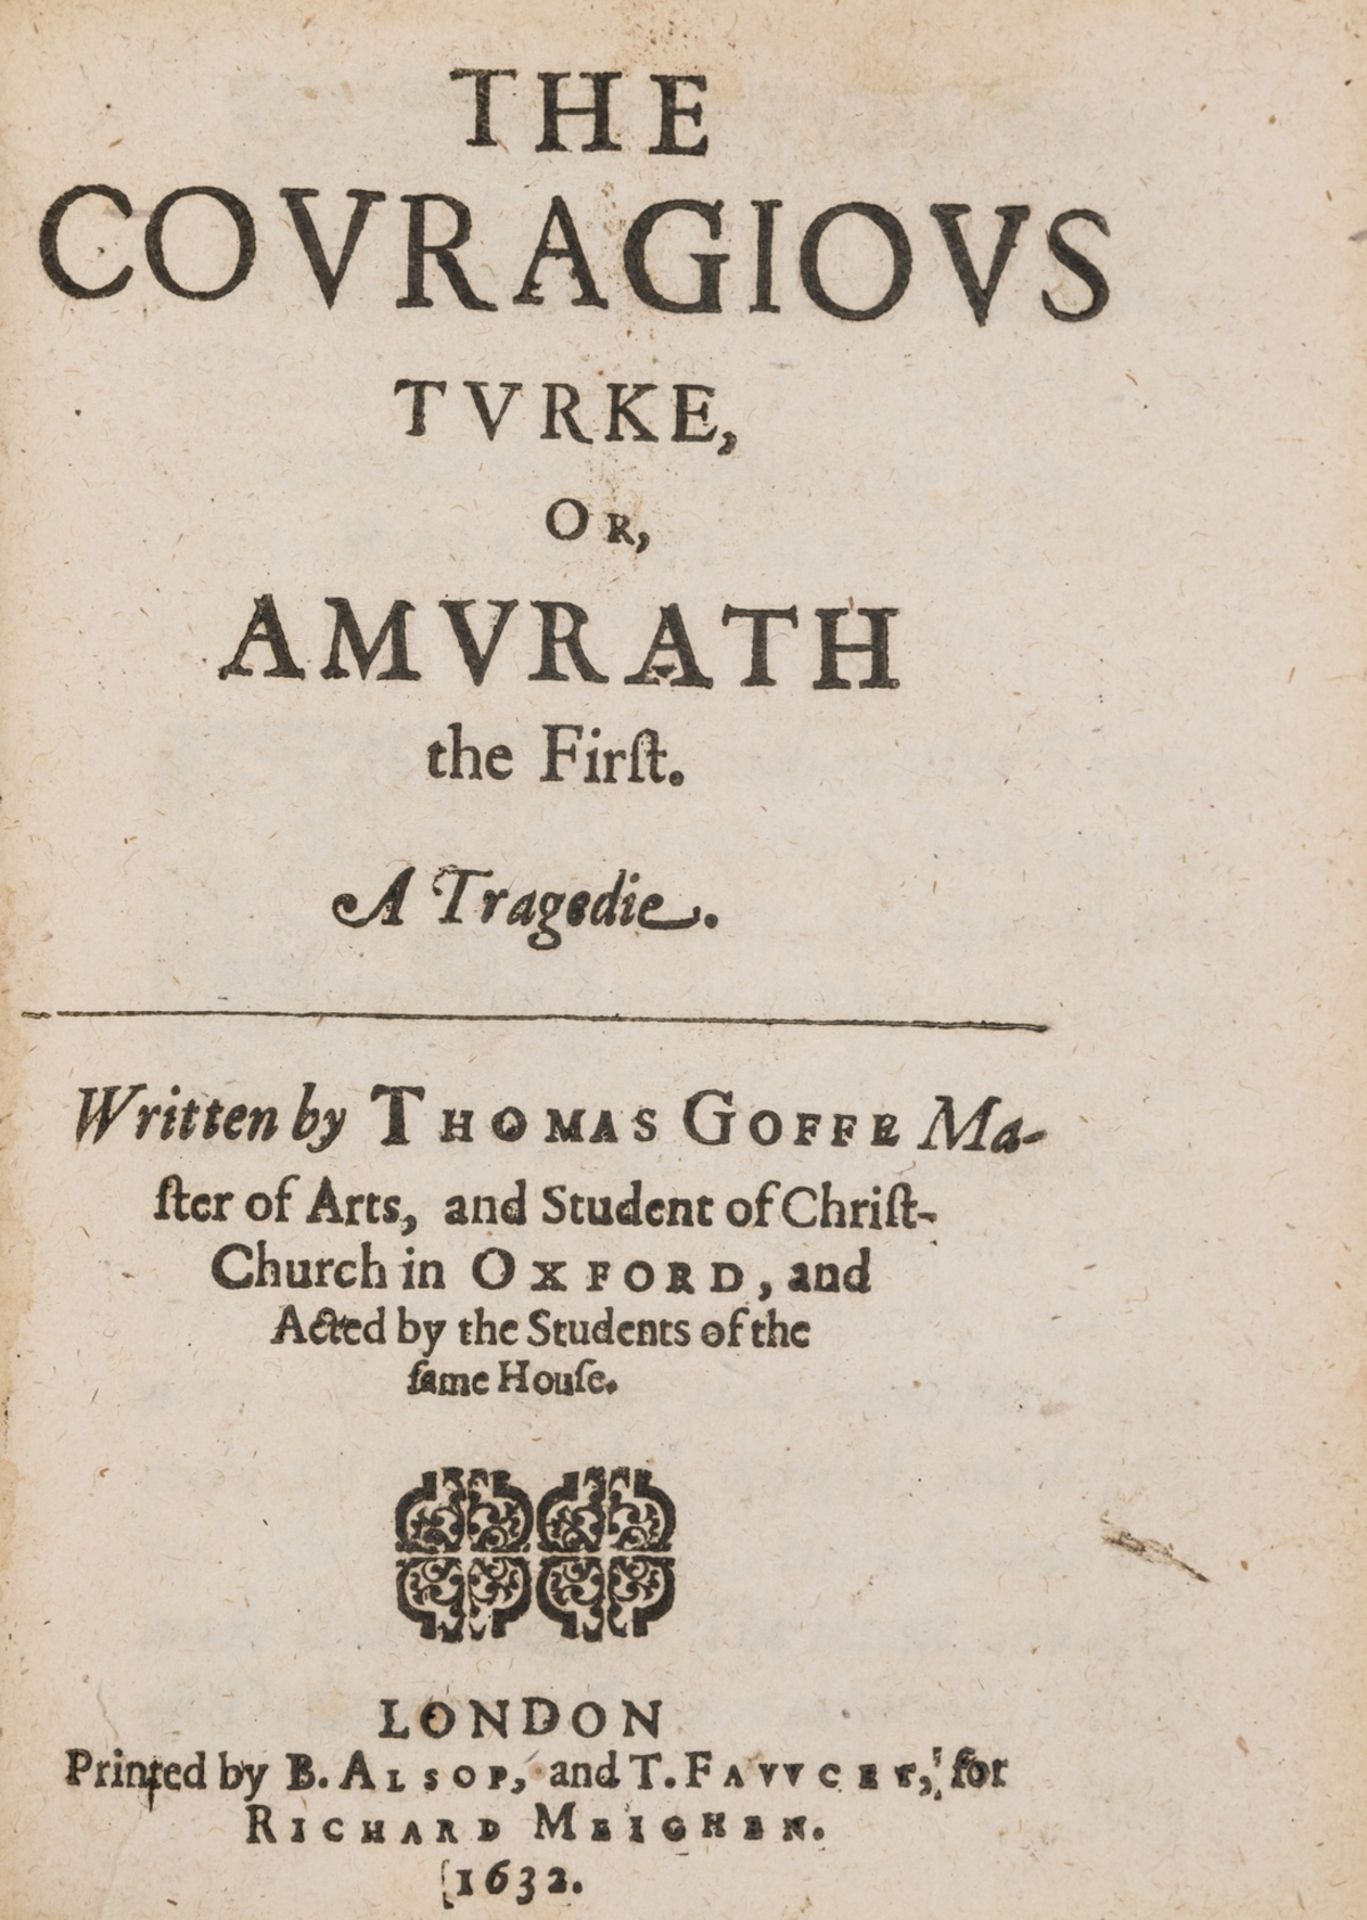 Goffe (Thomas) The Couragious Turke, or Amurath the First. A Tragedie, first edition, Printed by …